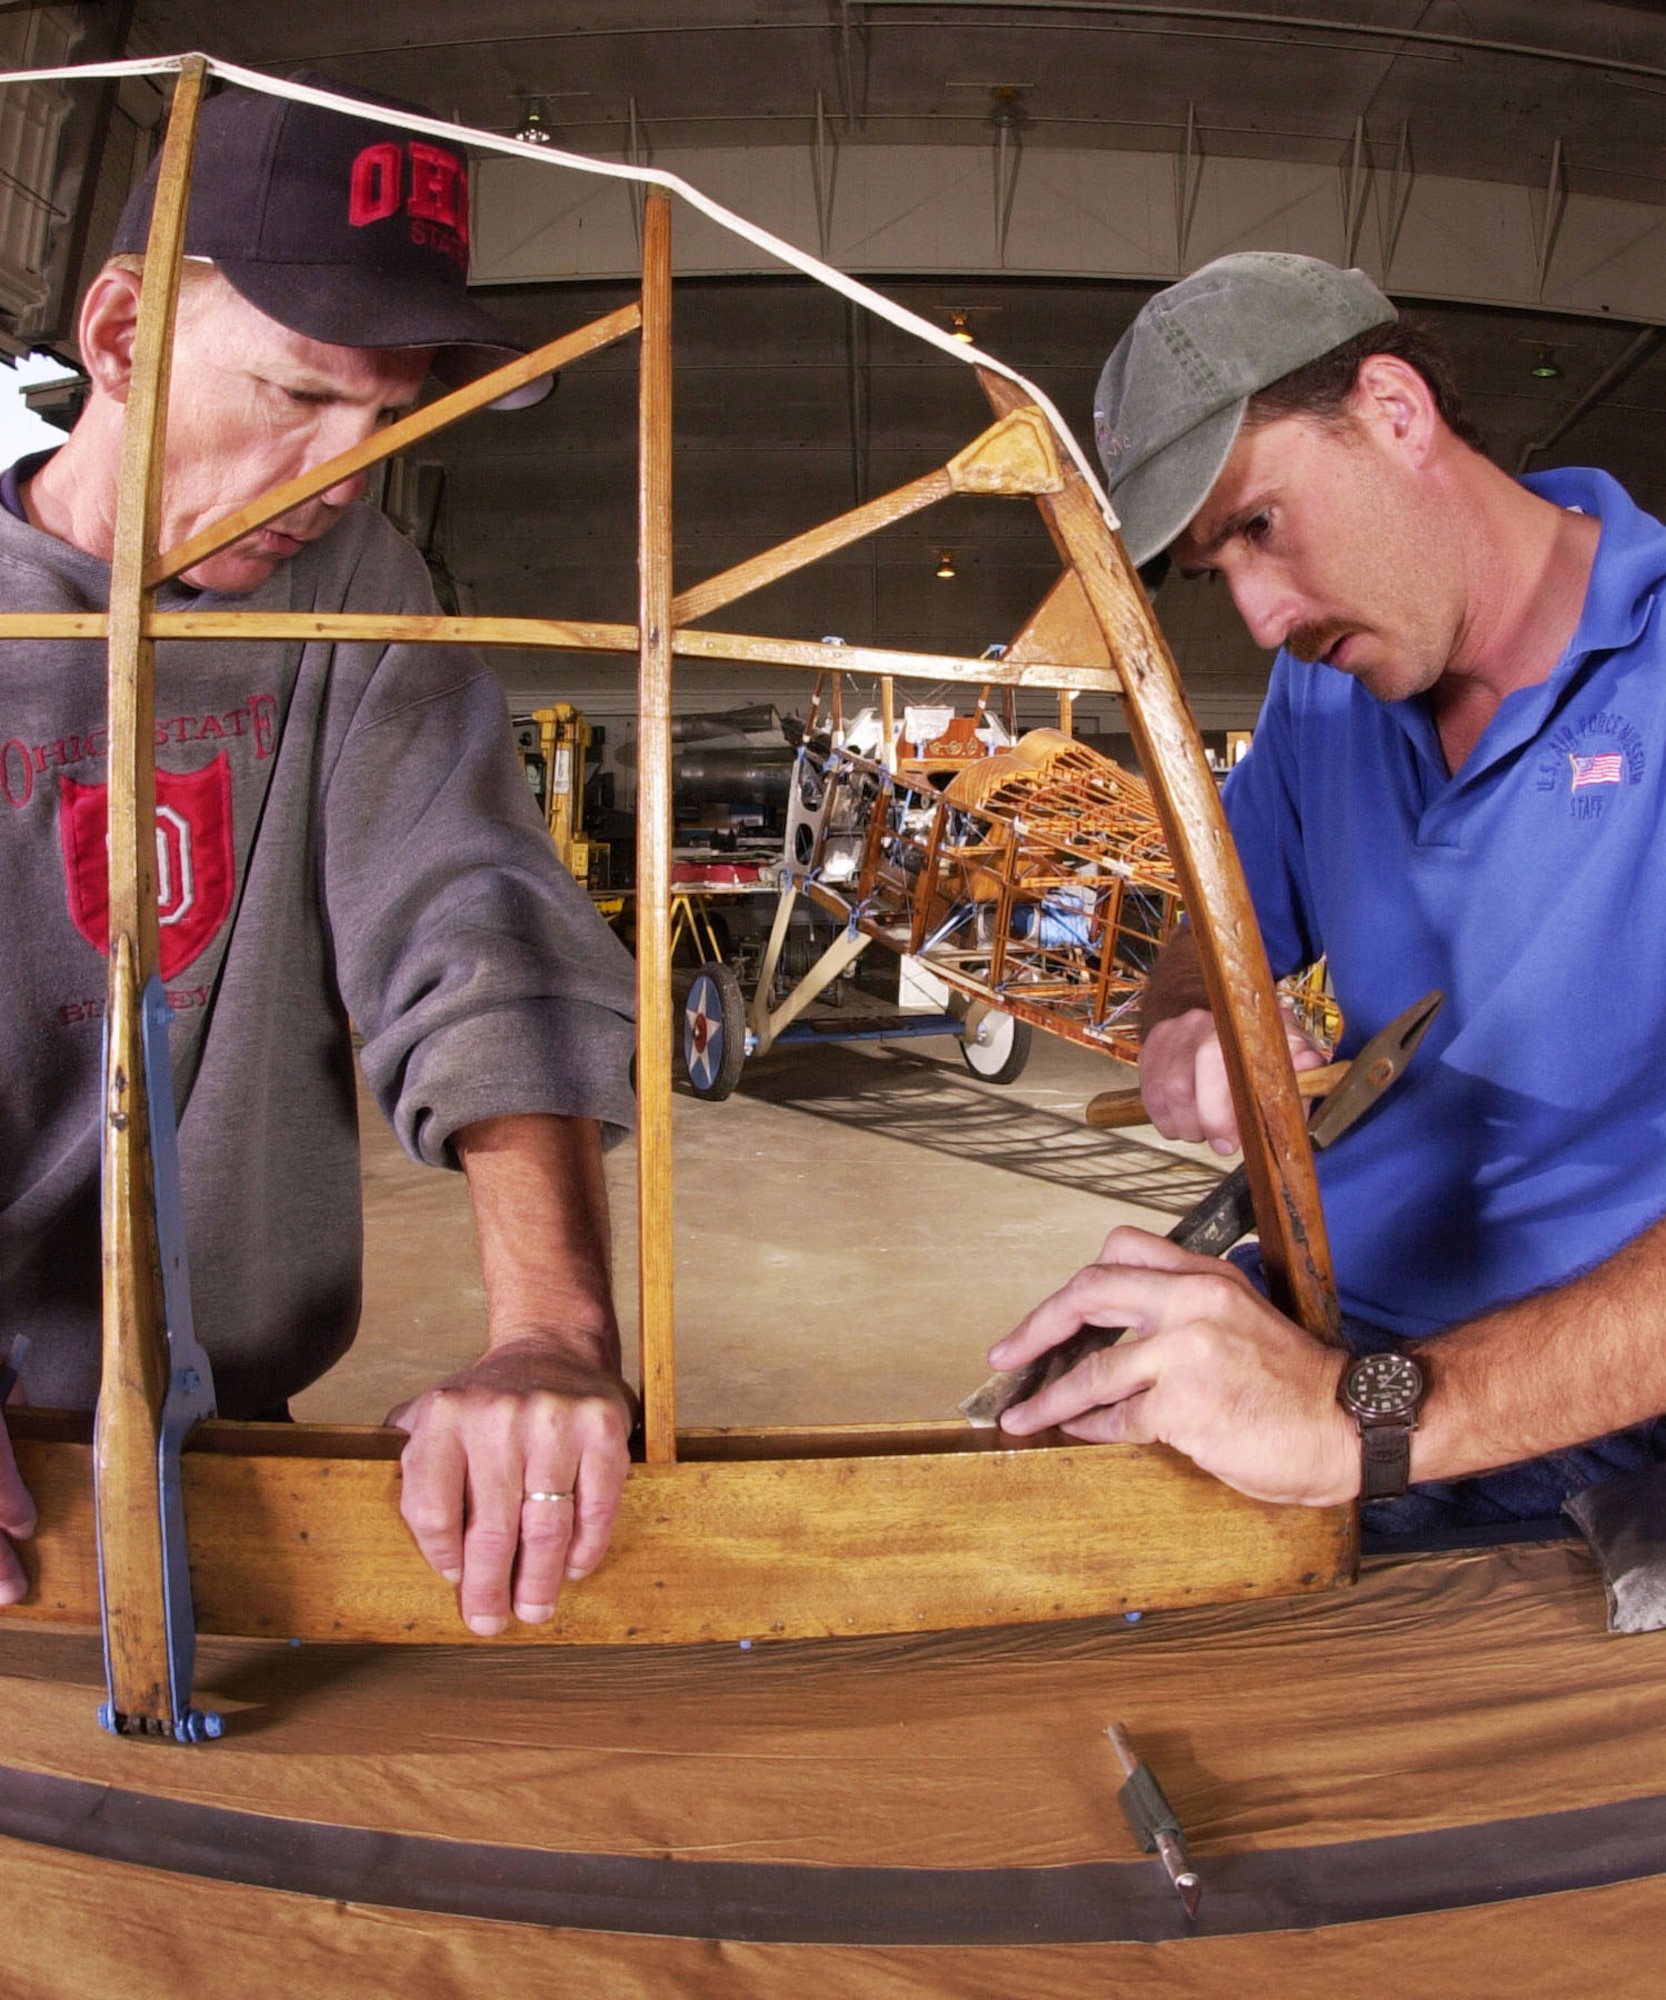 DAYTON, Ohio -- SPAD XIII restoration at the National Museum of the United States Air Force. (U.S. Air Force photo)